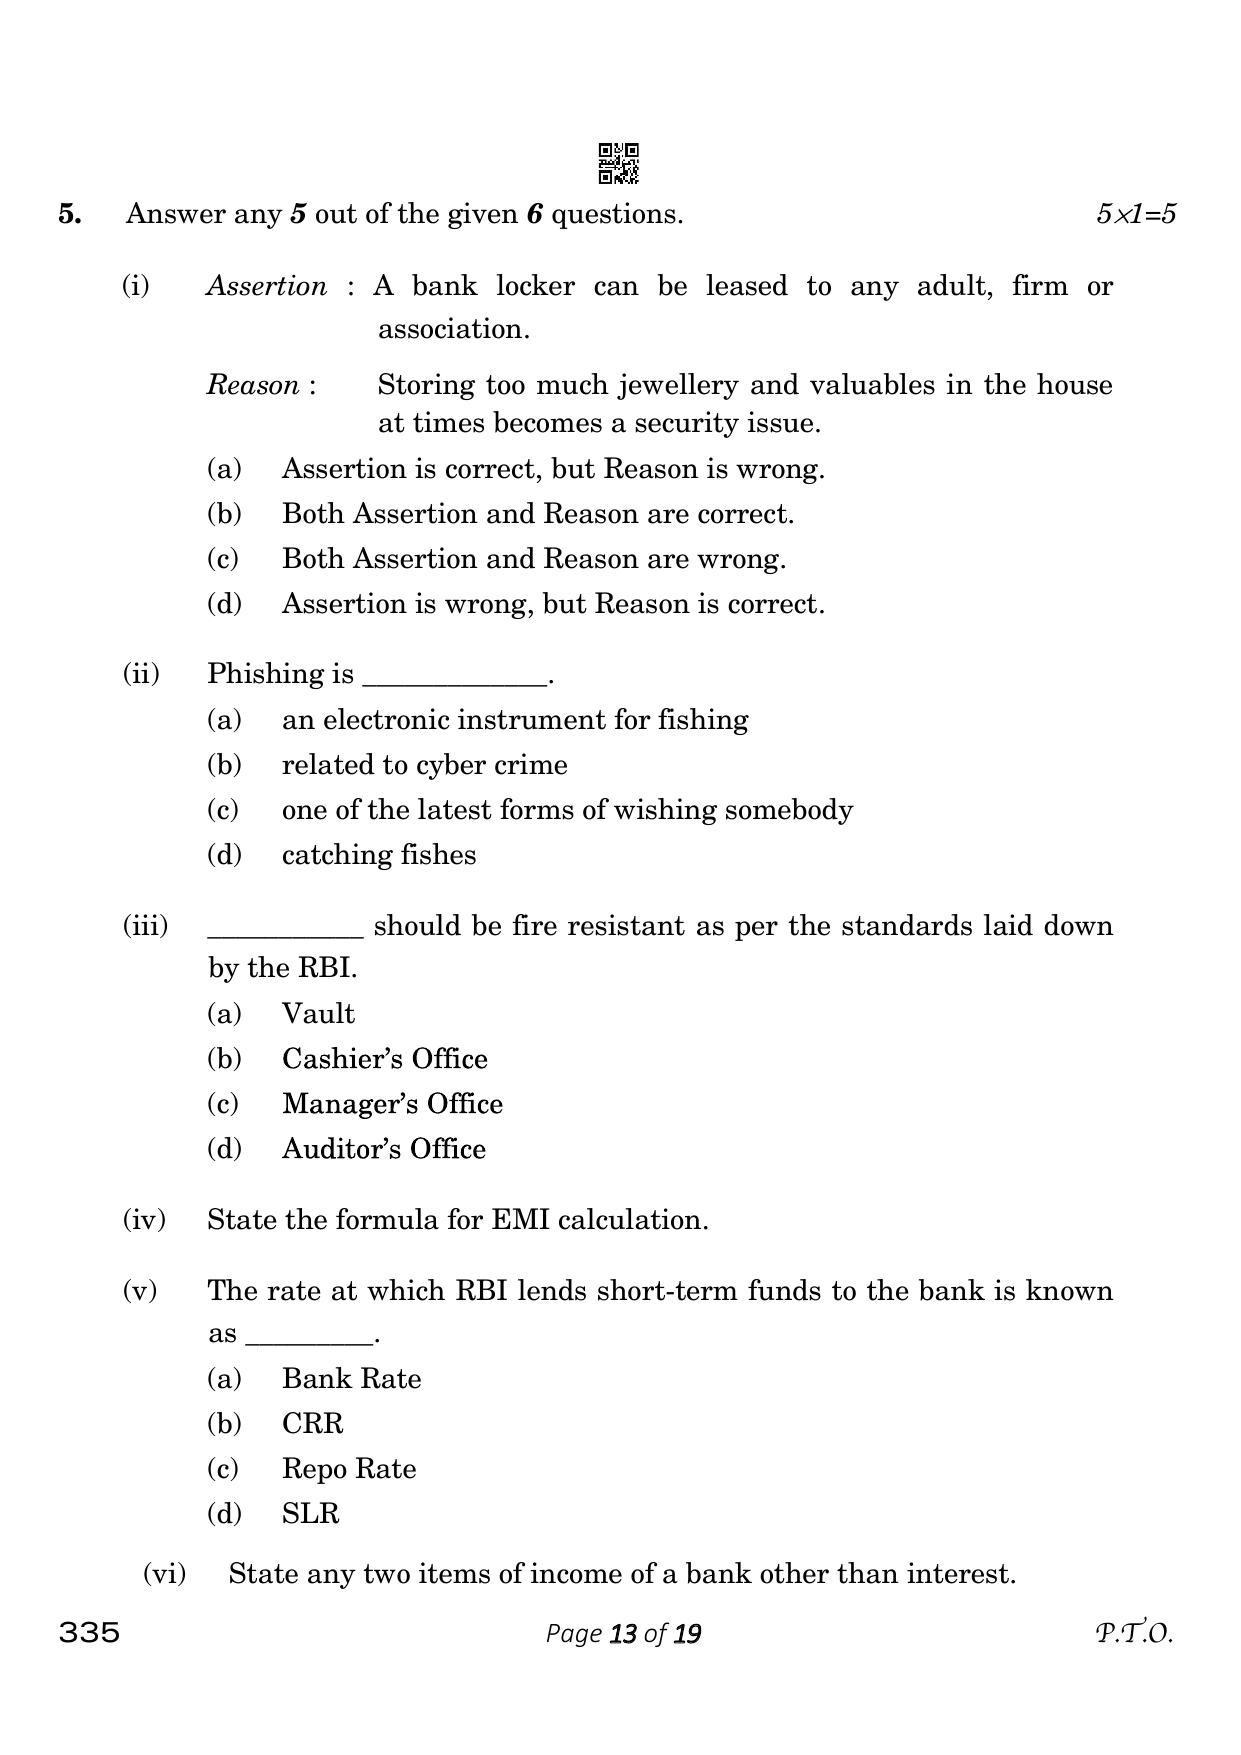 CBSE Class 12 335_Banking 2023 Question Paper - Page 13